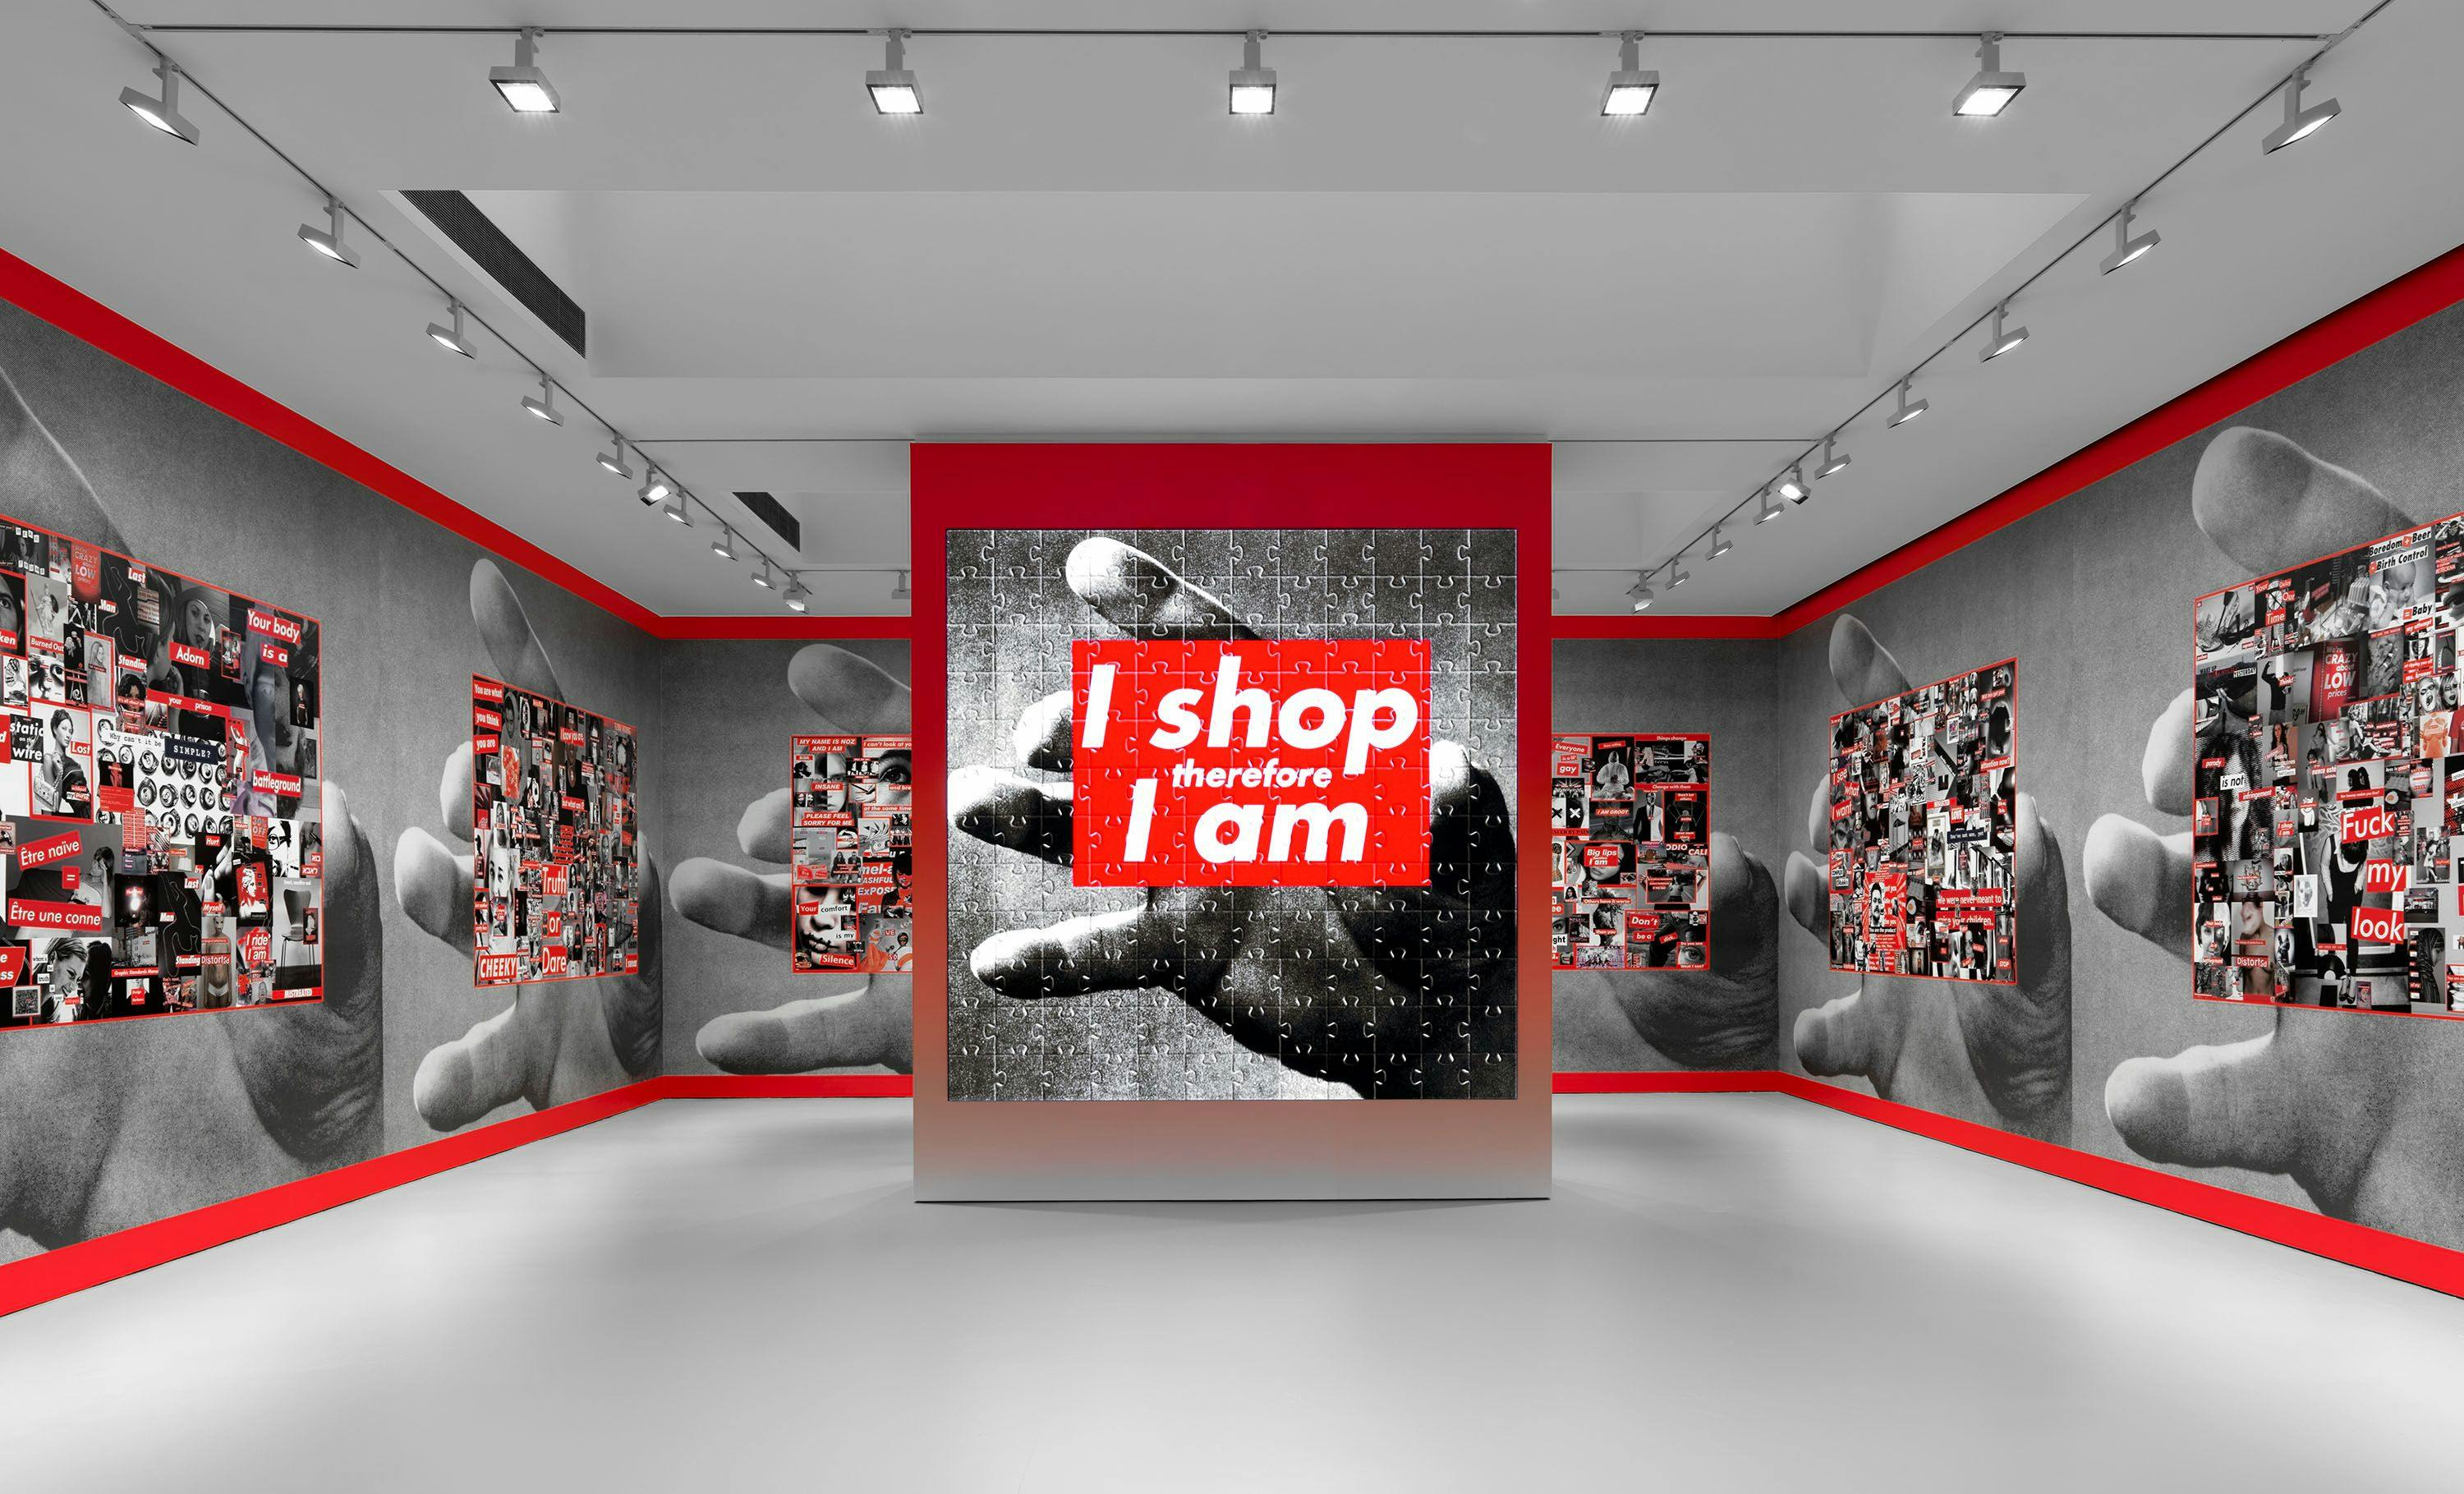 Installation view of the exhibition titled Barbara Kruger at David Zwirner in New York, dated 2022.